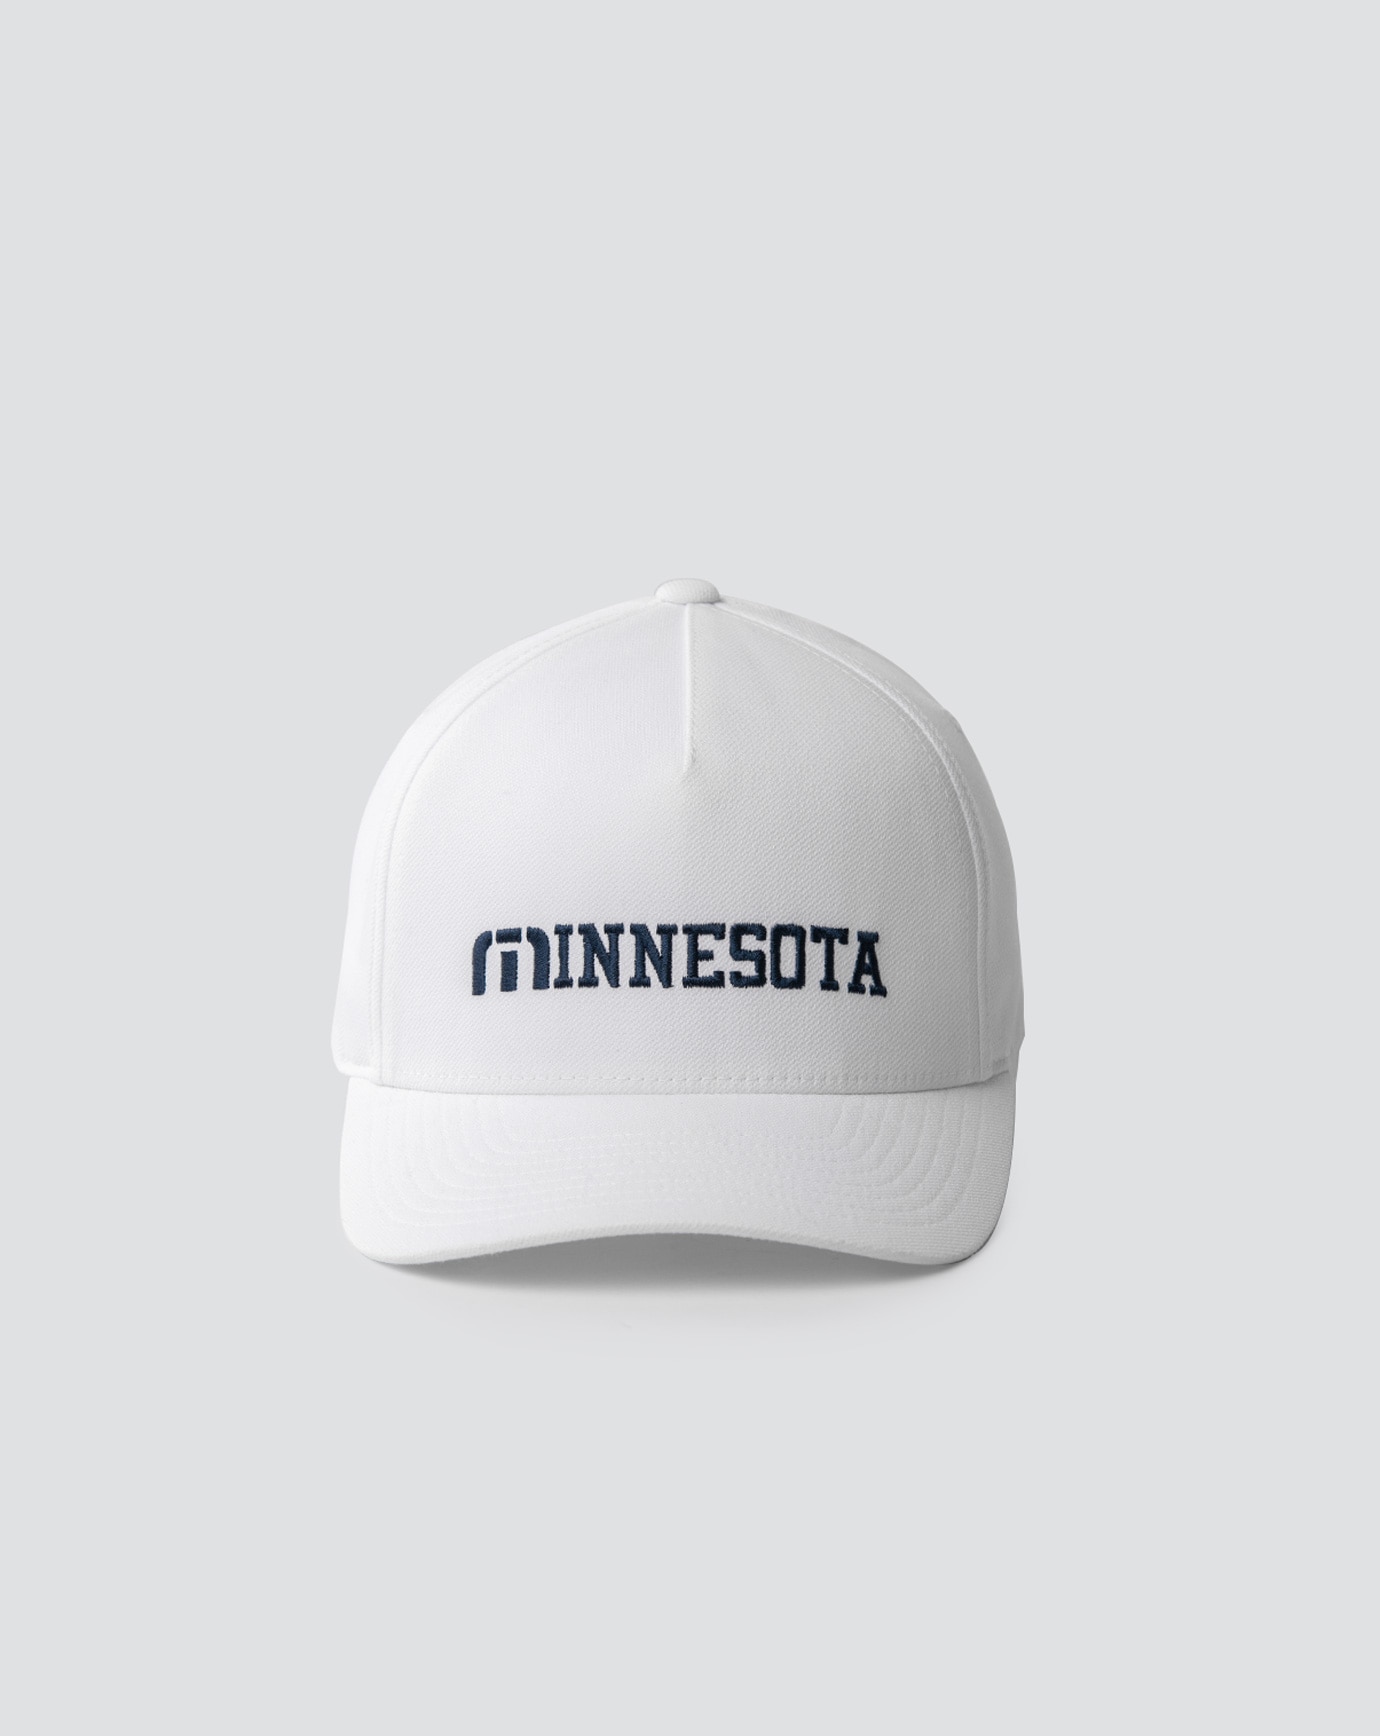 Related Product - NICE FITTED HAT